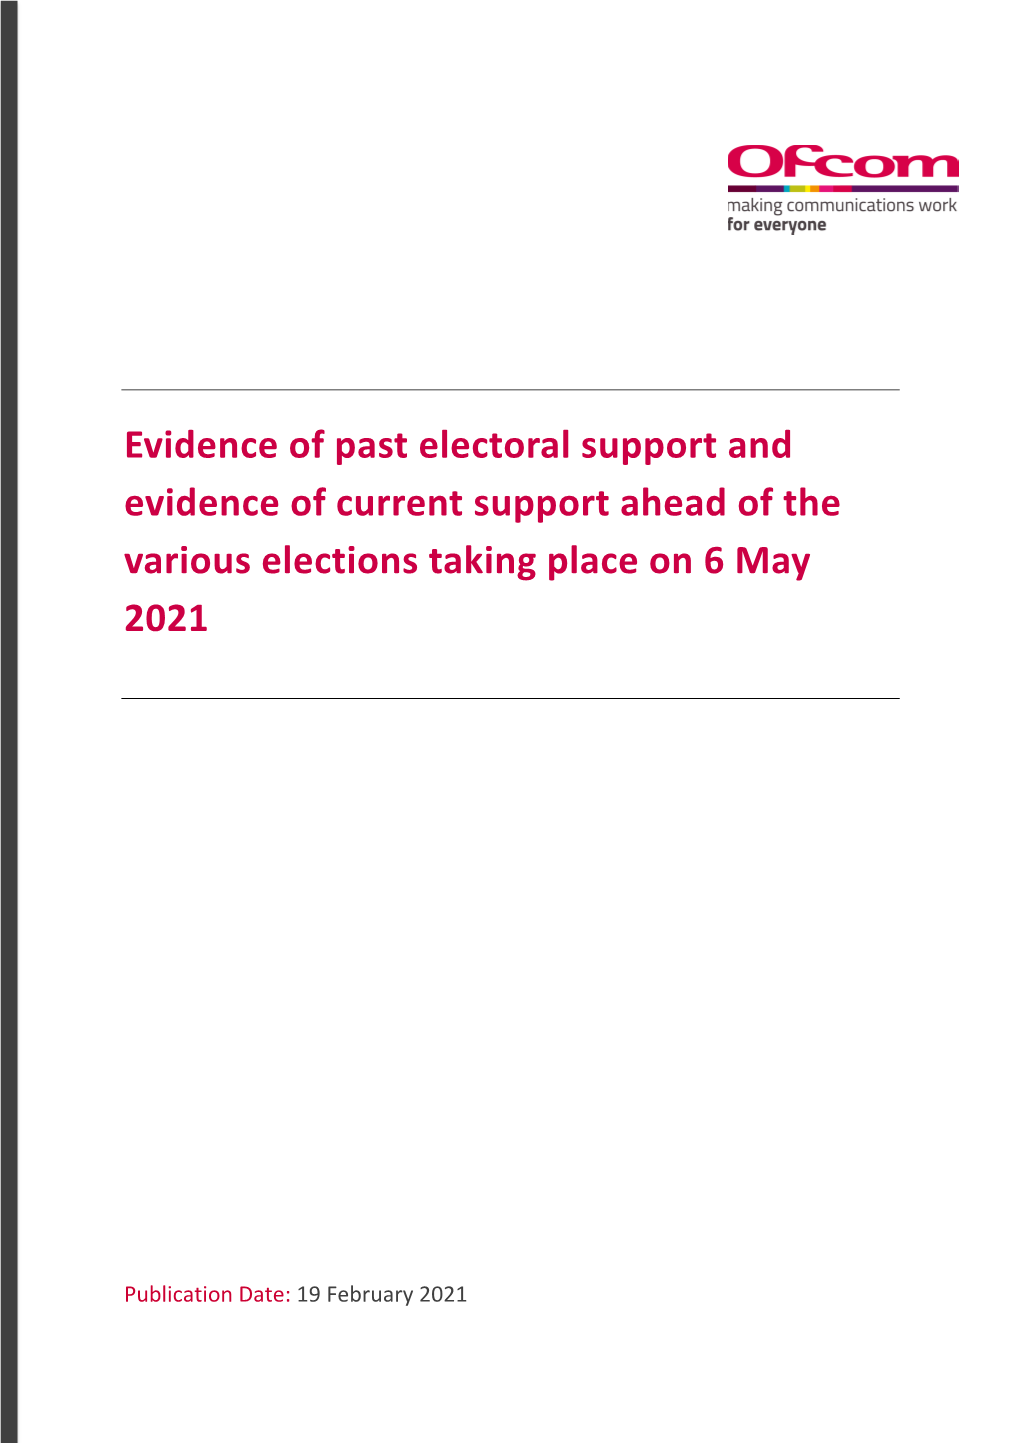 Evidence of Past Electoral Support and Evidence of Current Support Ahead of the Various Elections Taking Place on 6 May 2021